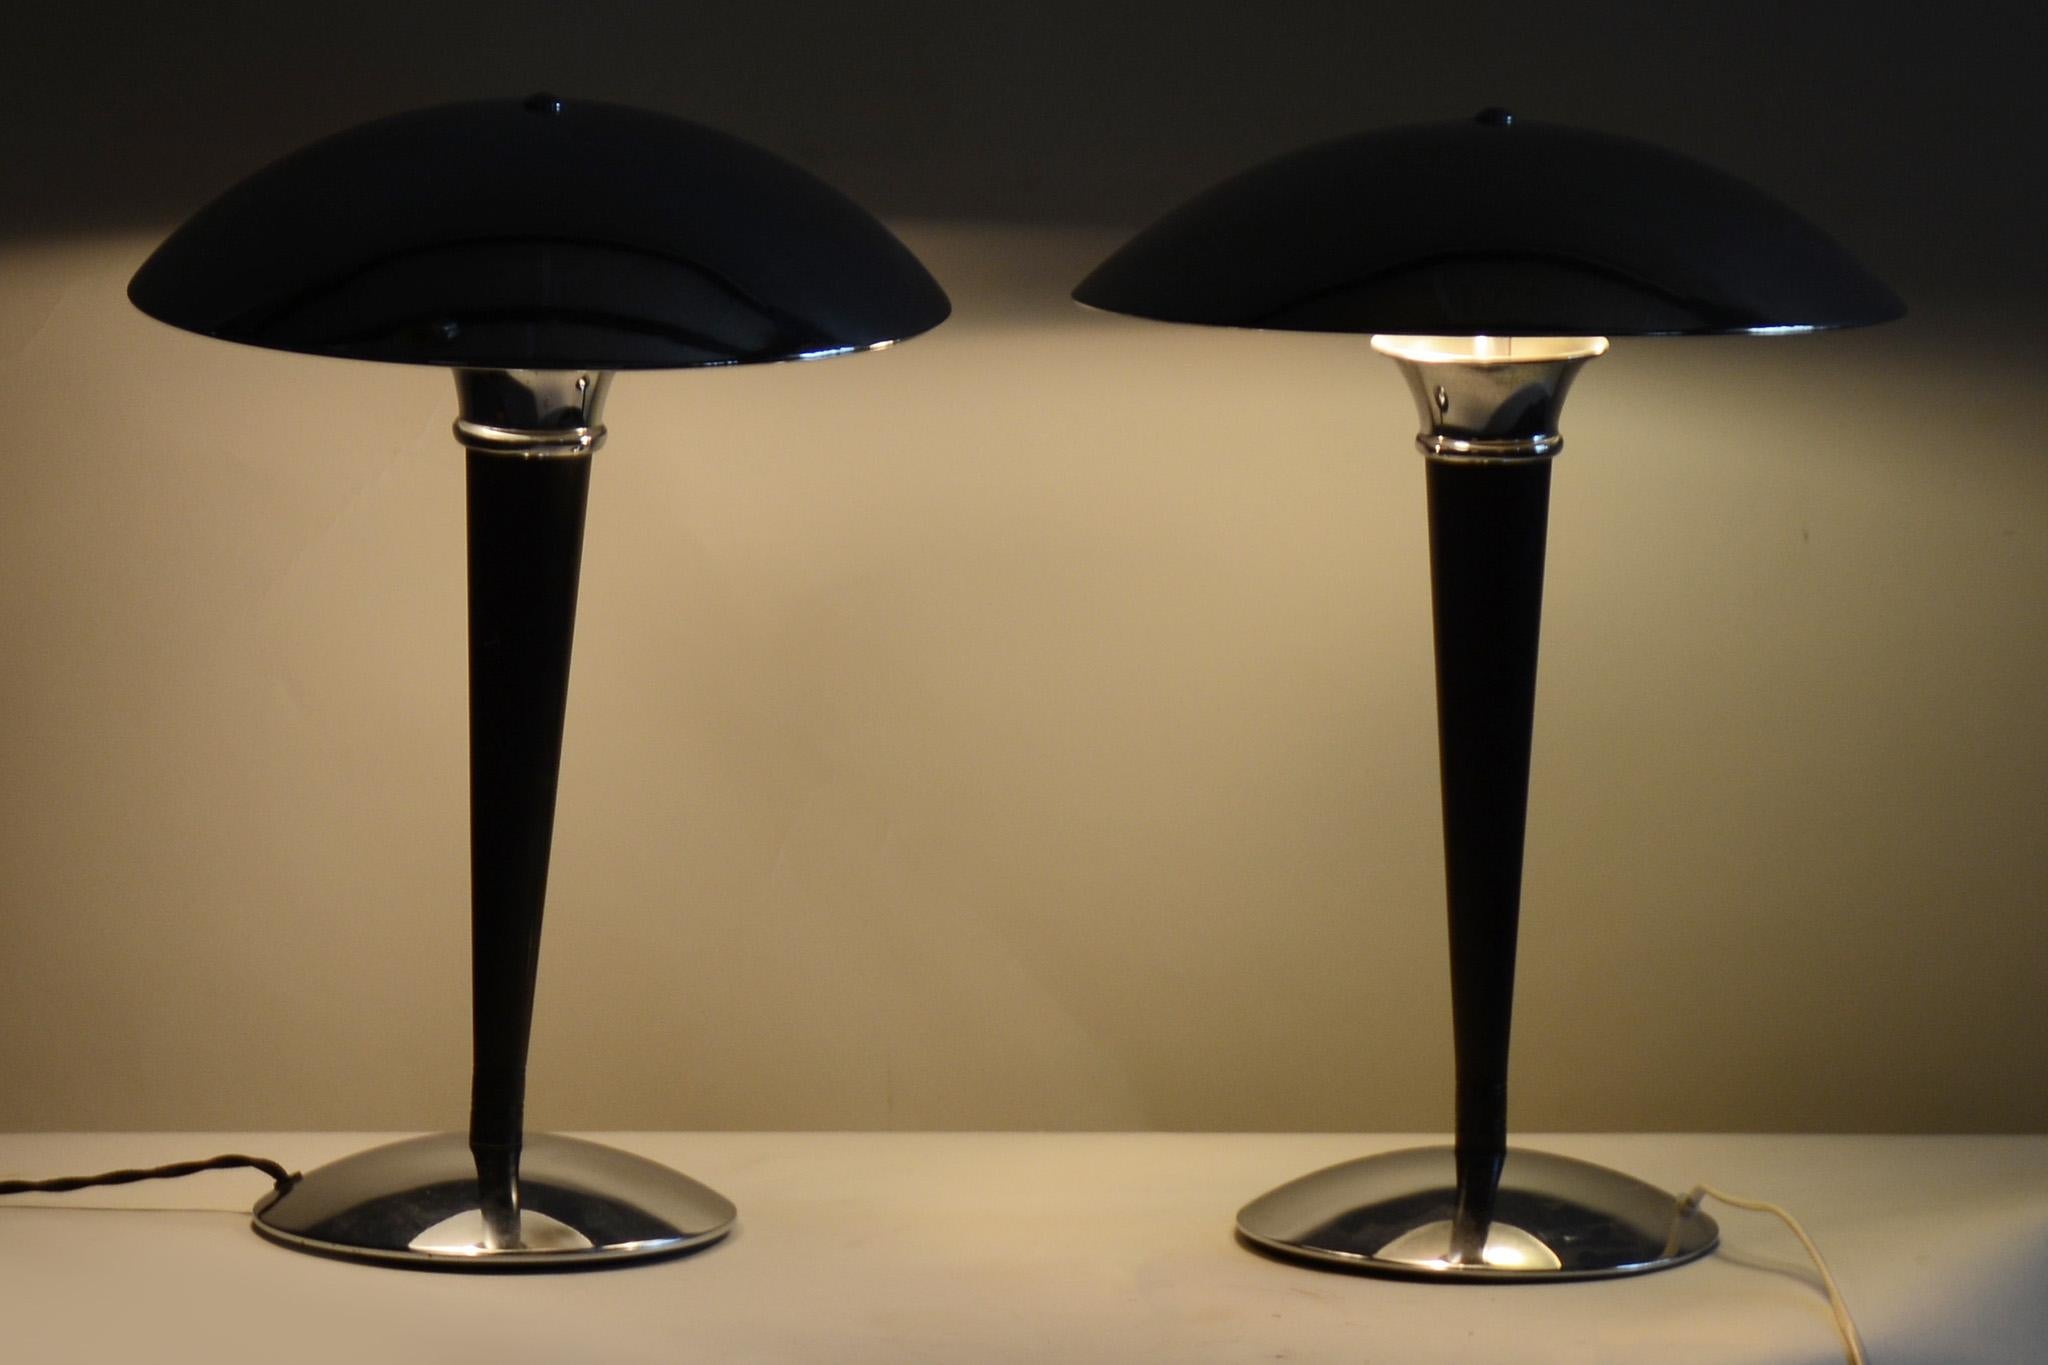 Pair of midcentury black table lamps with new electrification.

Period: 1950-1959
Source: Germany
Material: Chrome-Plated Steel. Black Lacquer

It has been fully restored by our professional refurbishing team in Czechia according to the